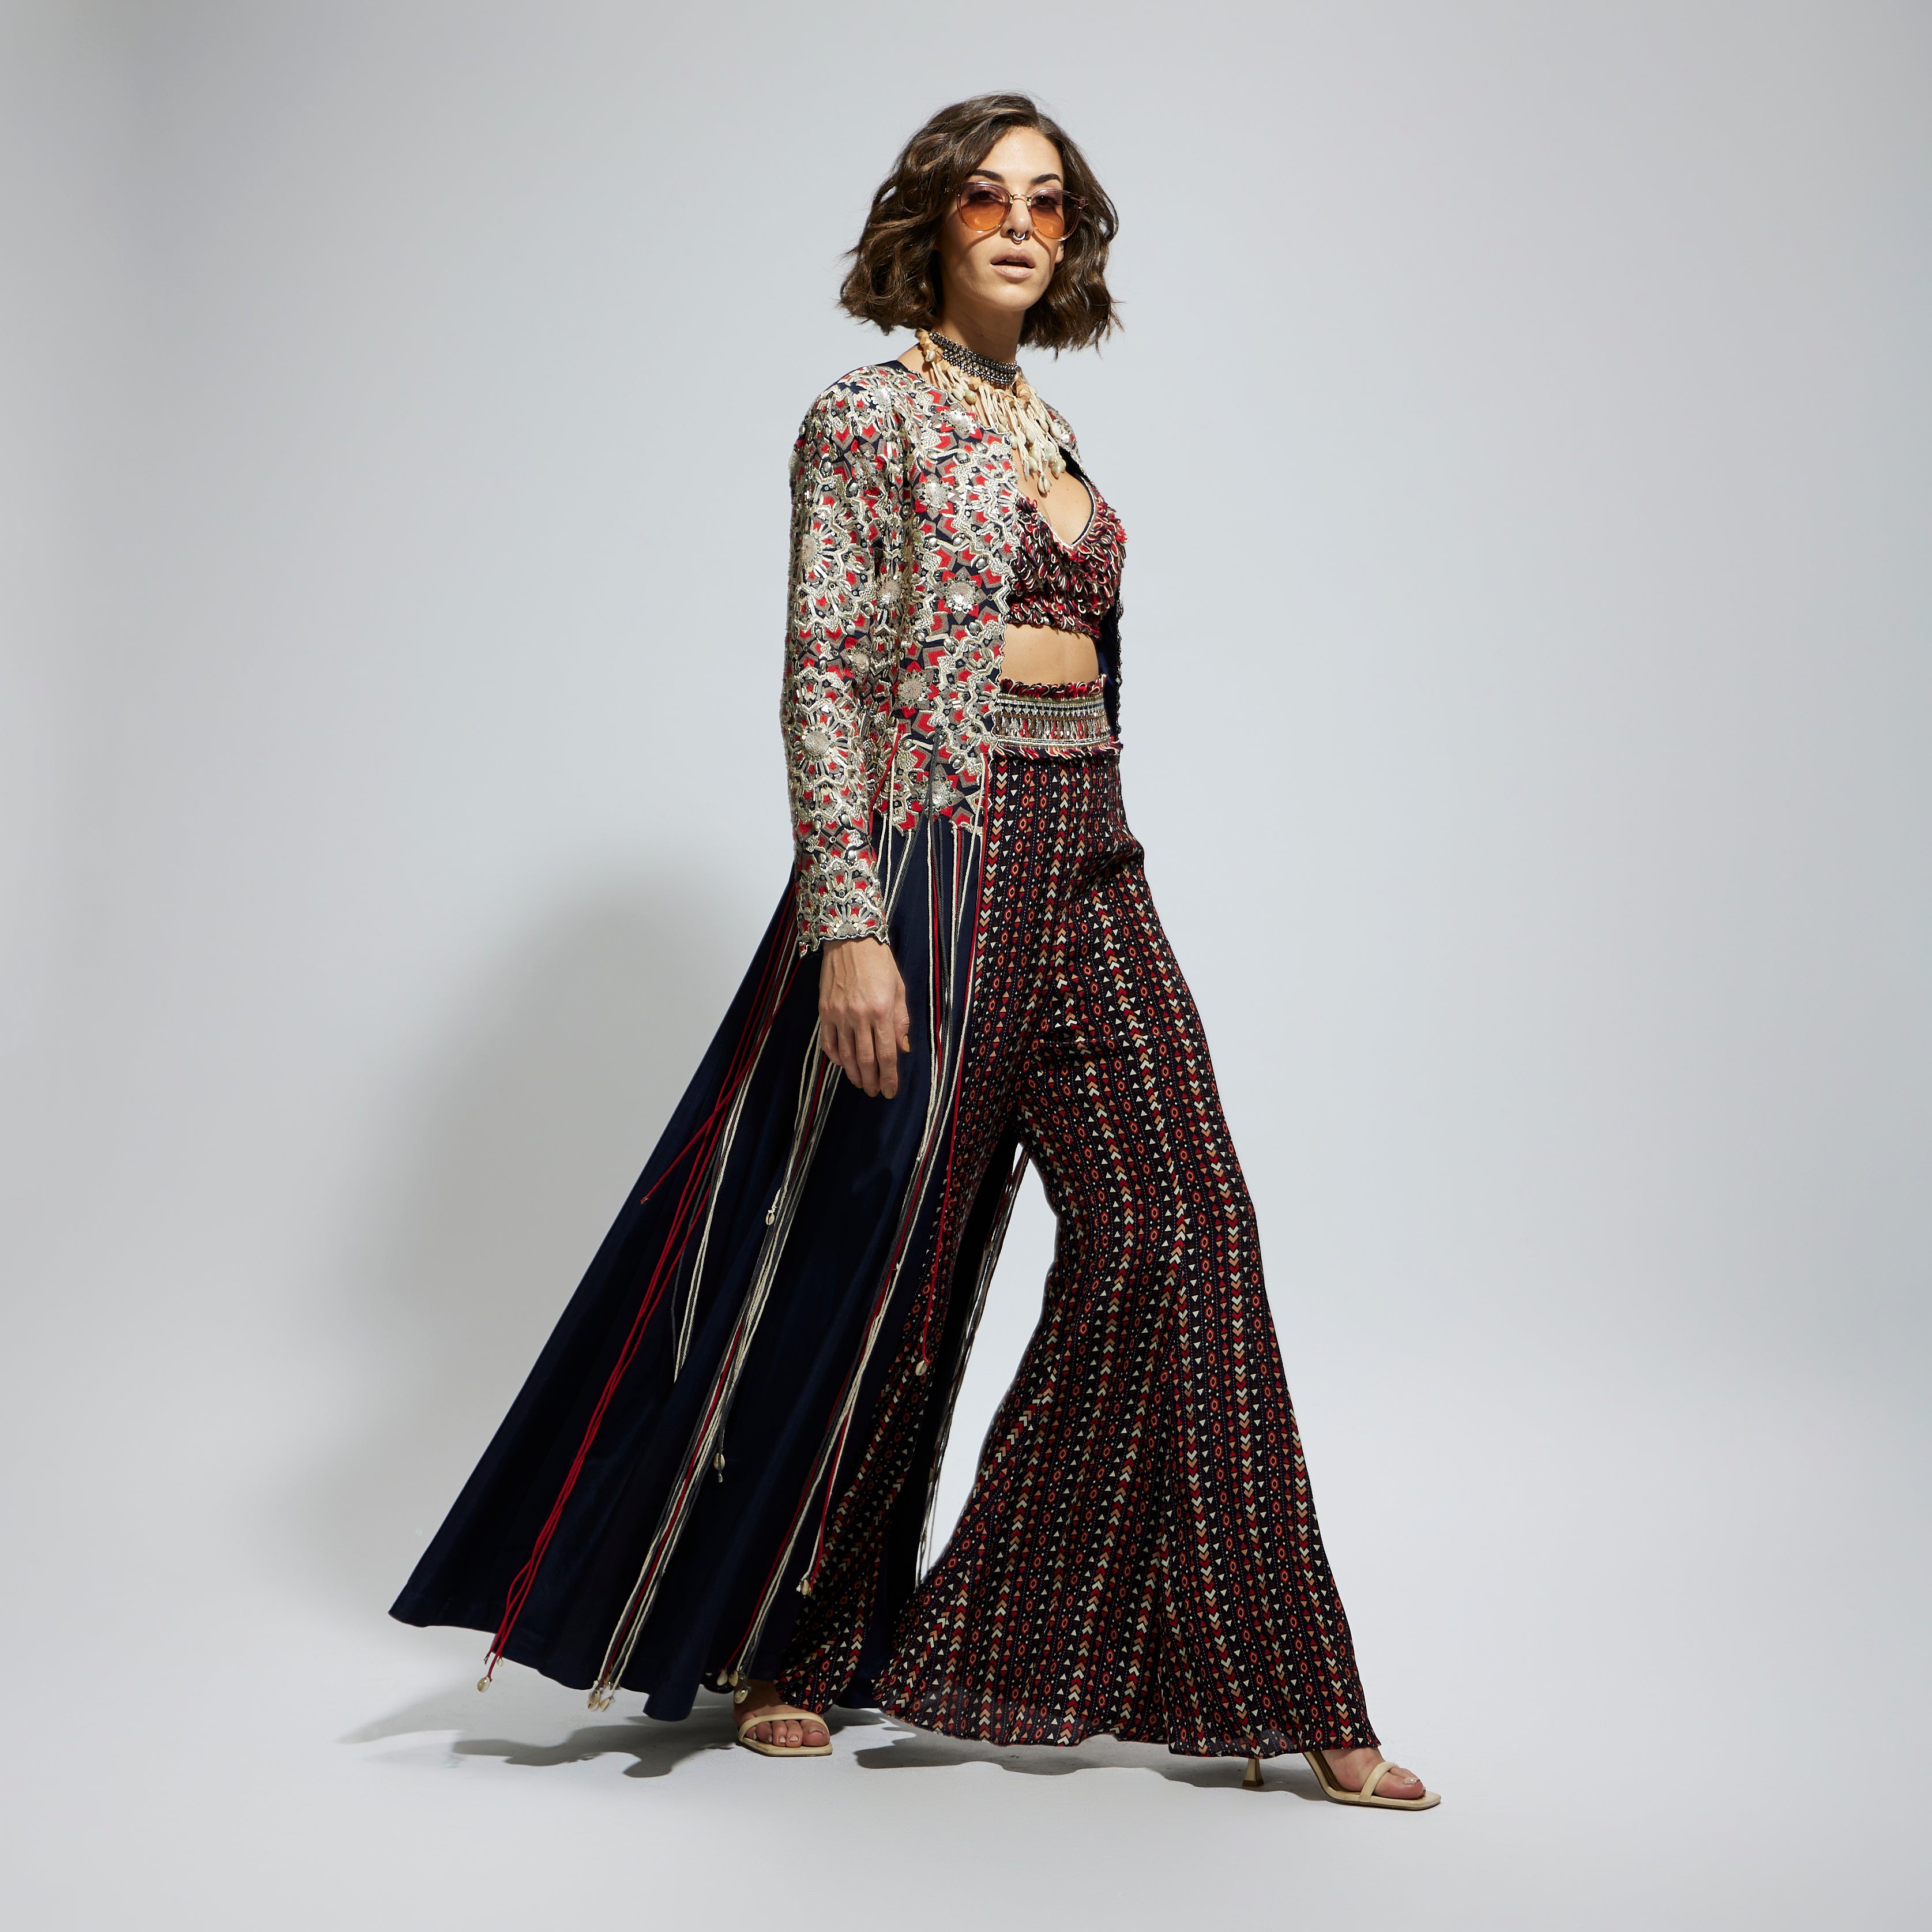 BLUE THREADWORK EMBELLISHED JACKET PAIRED WITH TEXTURED BUSTIER AND BLUE PRINTED SHARARA PANTS